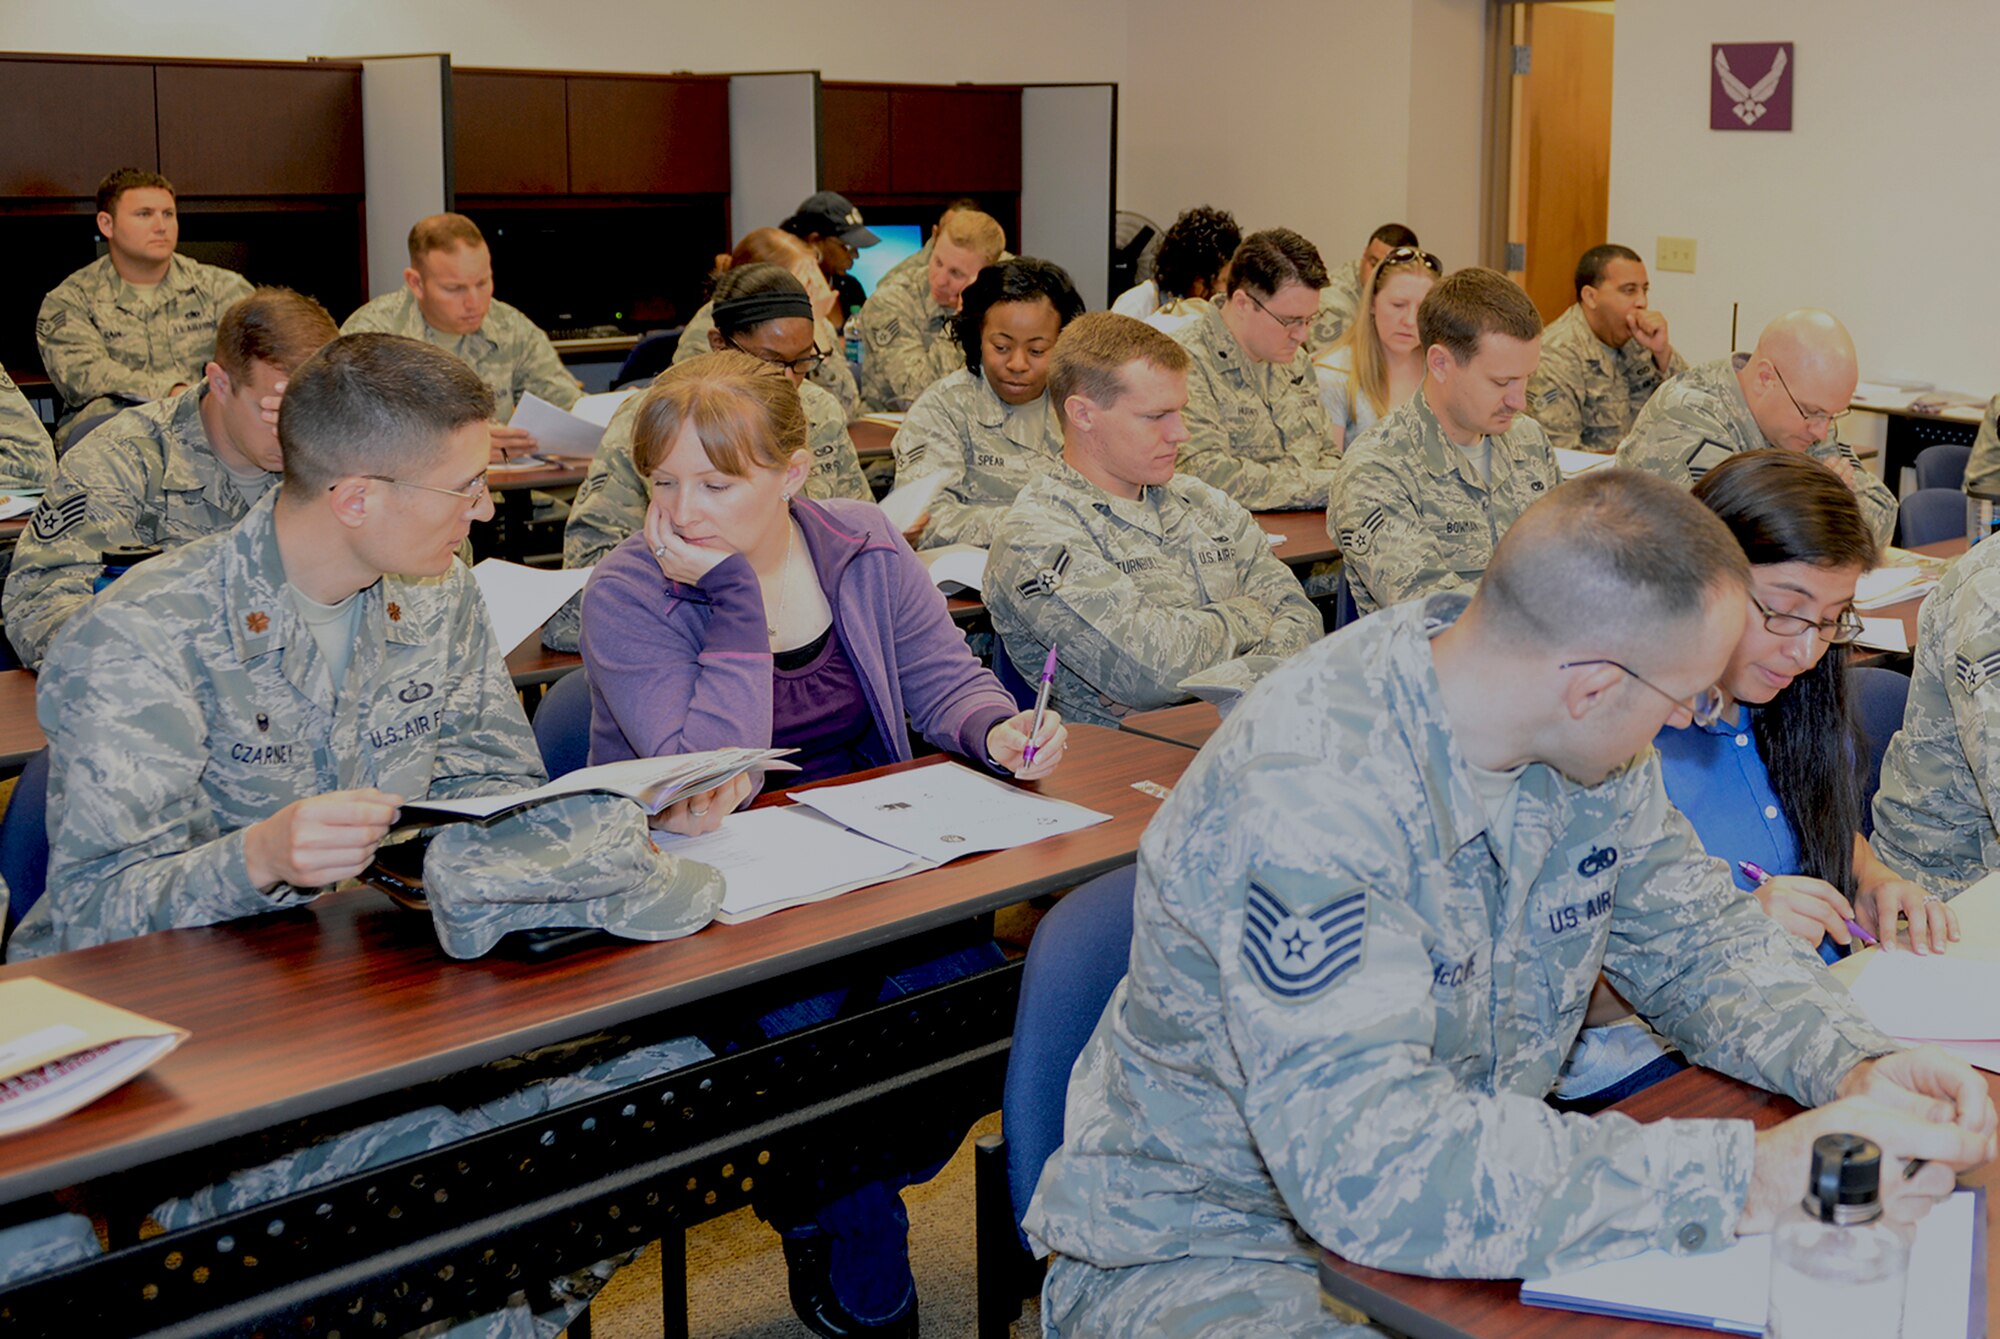 Airmen and family members attend a Smooth Move briefing March 11, 2015, at Moody Air Force Base, Ga. The briefing taught Airmen how to prepare for a smooth permanent change of station. (U.S. Air Force photo by Airman Greg Nash/Released)